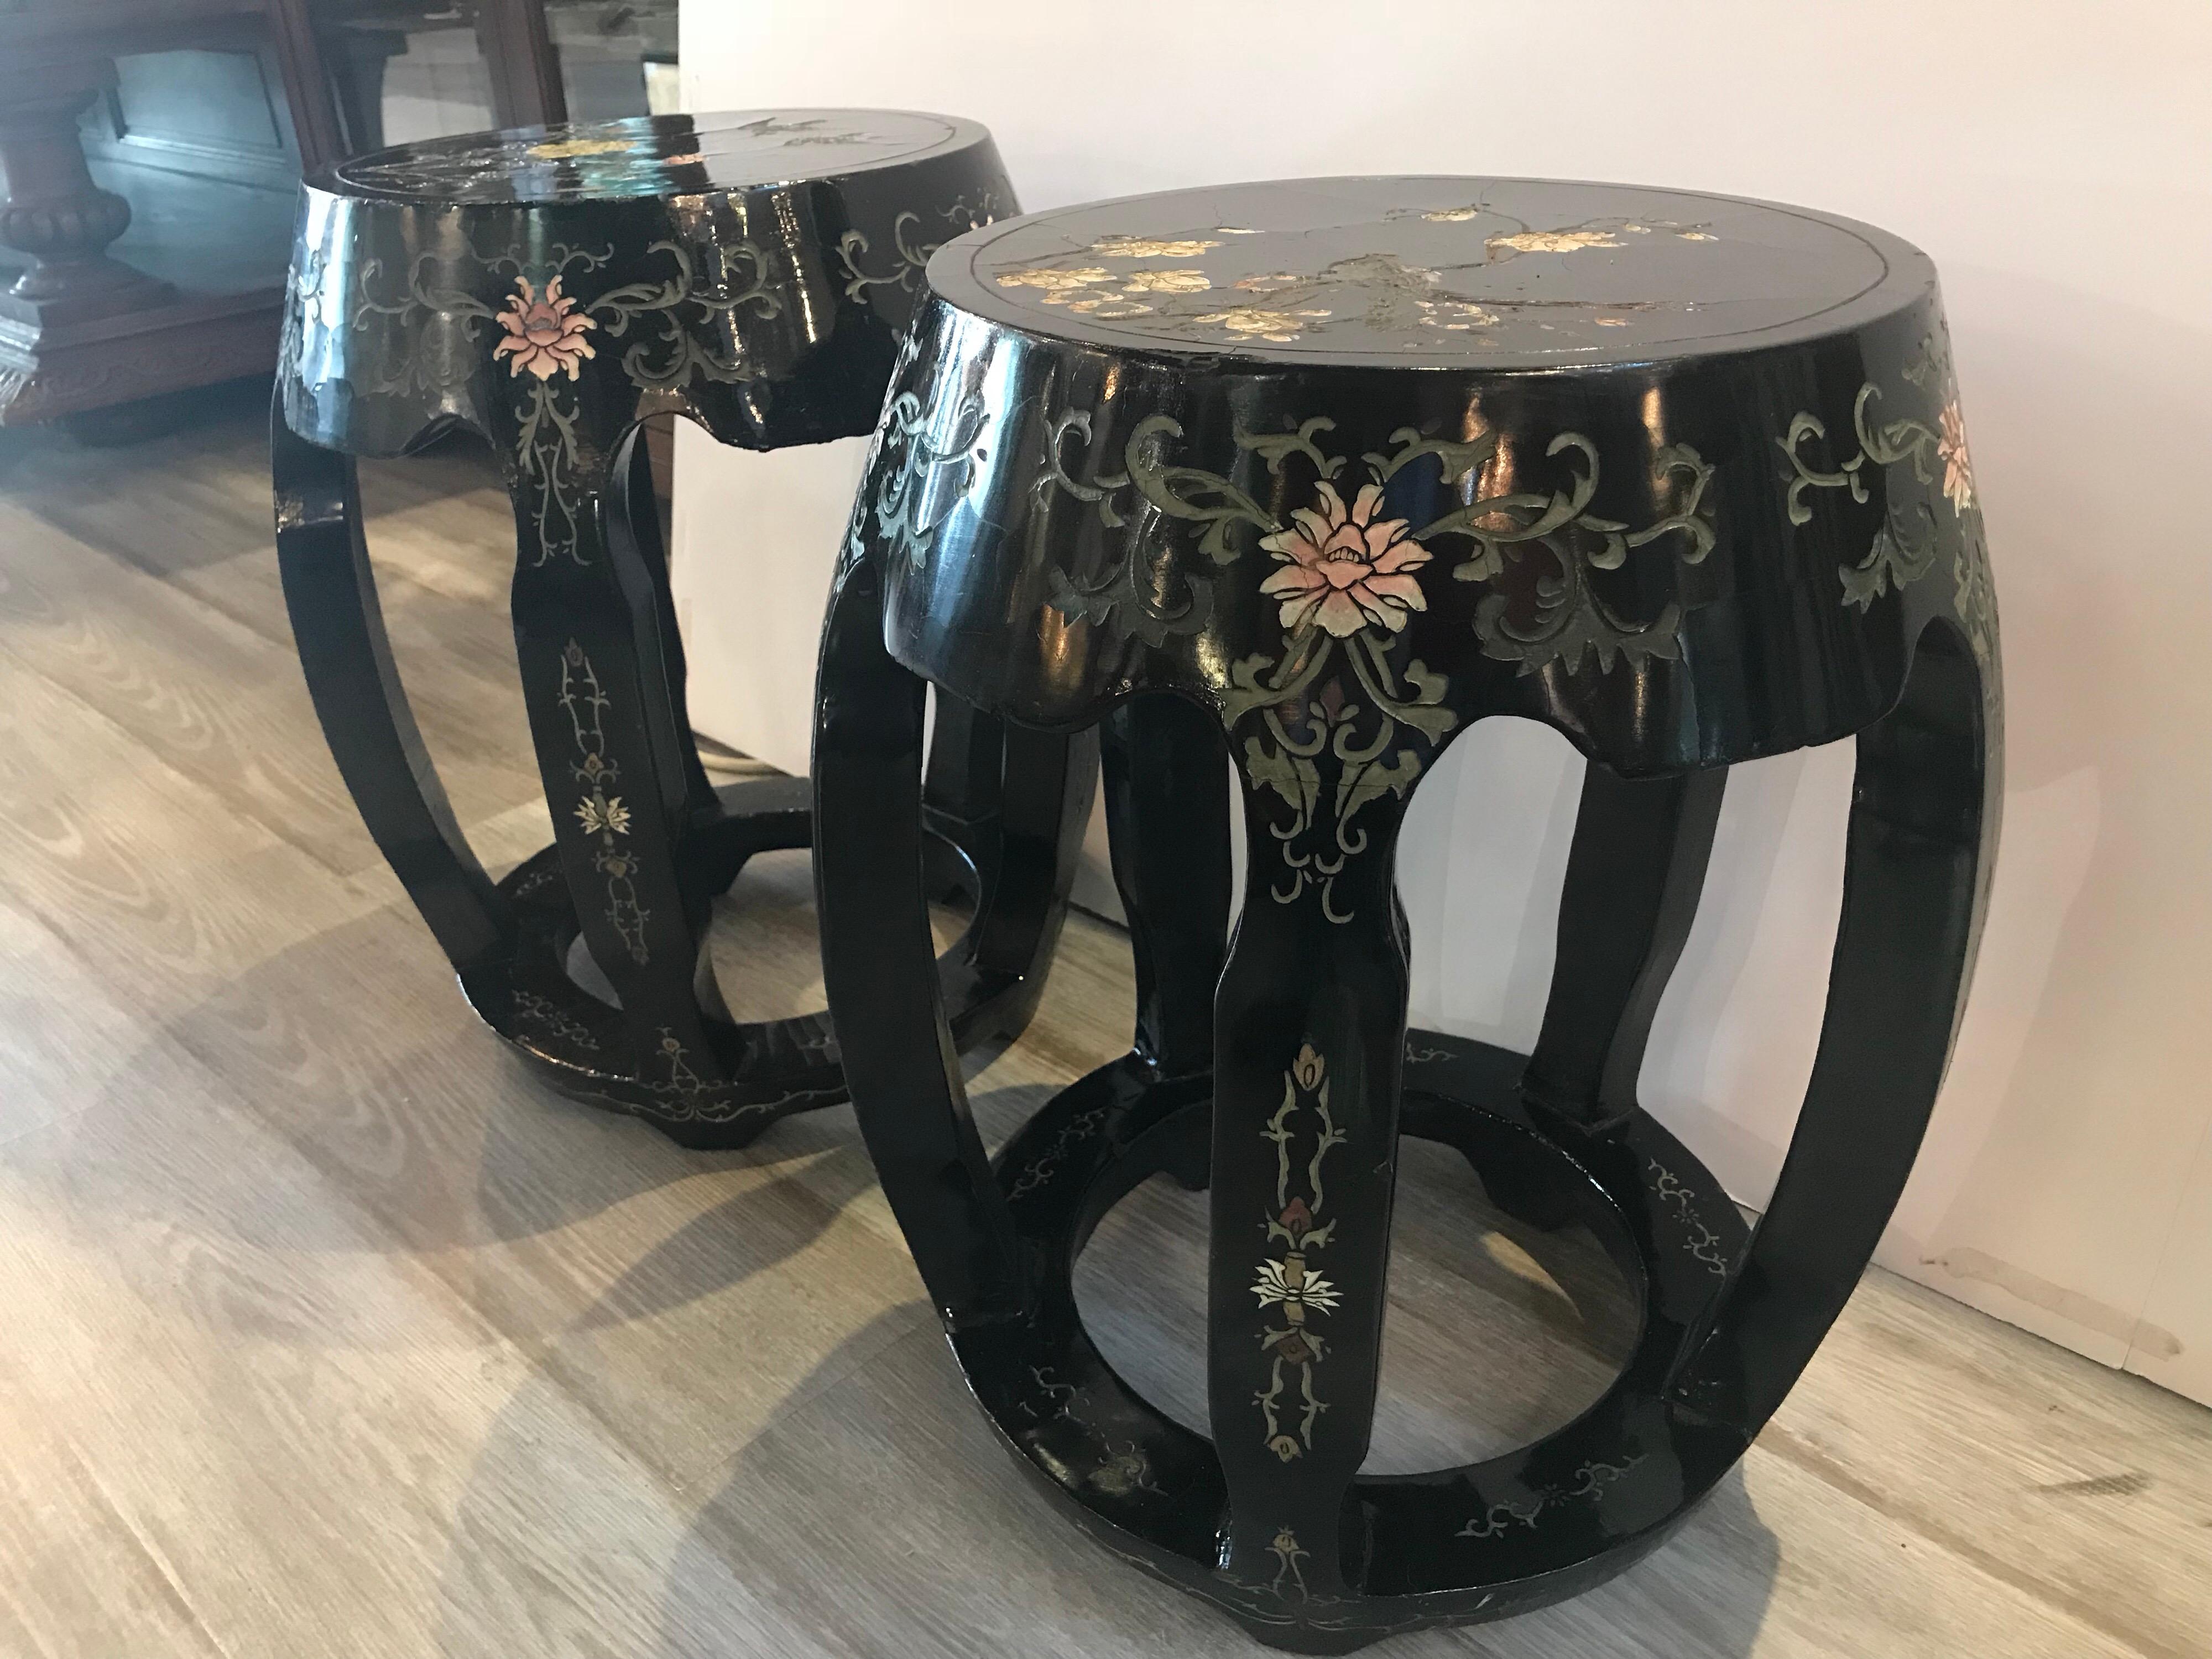 Elegant pair of black lacquer garden sear shaped stands from the Hollywood Regency period. The original black lacquer with Classic Chinese relief floral and bird decoration. The round stands with five legs with circular base. The finish has age